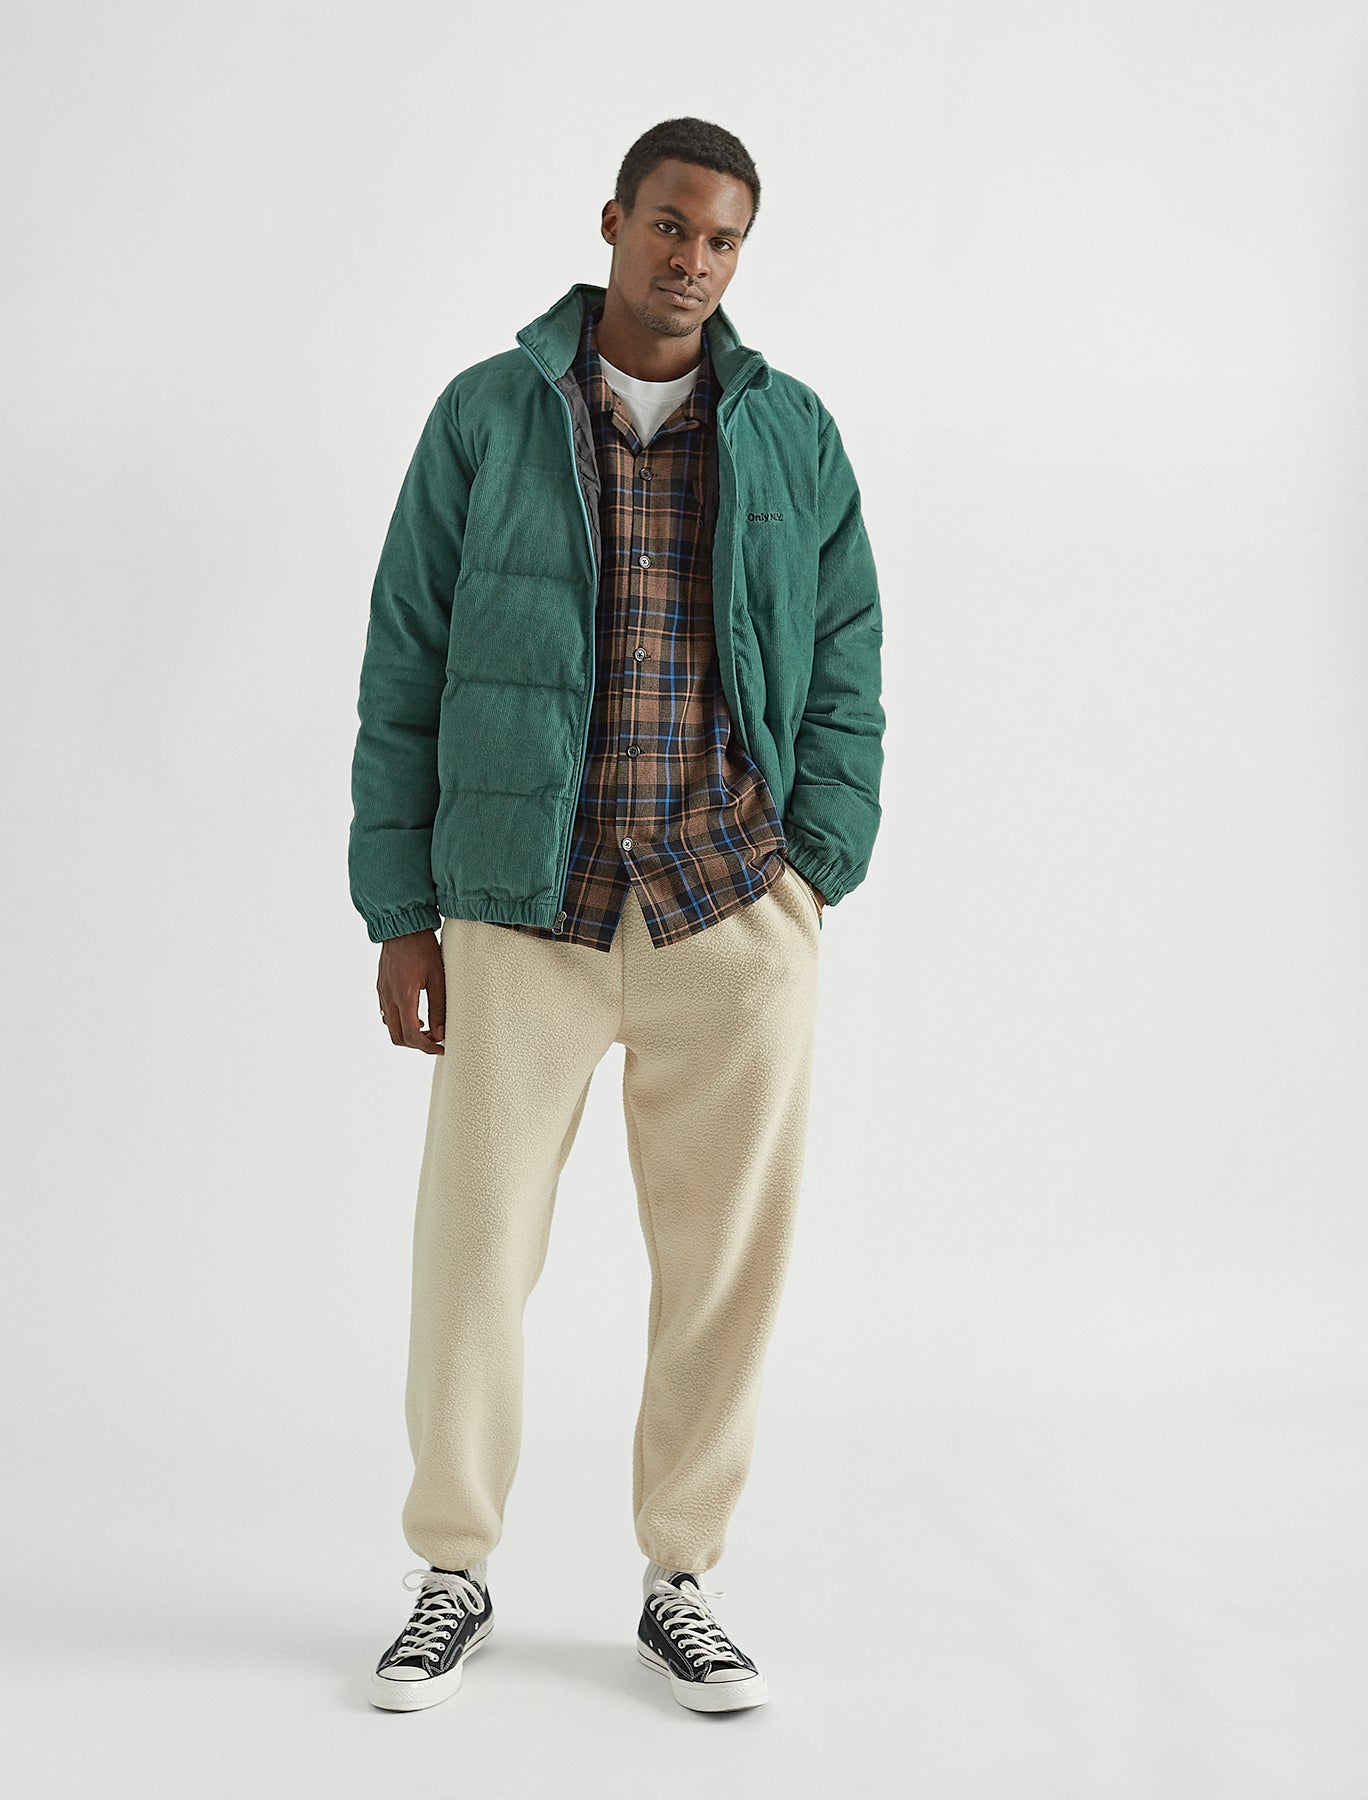 Fall/Winter 2019 Delivery 1 – Only NY